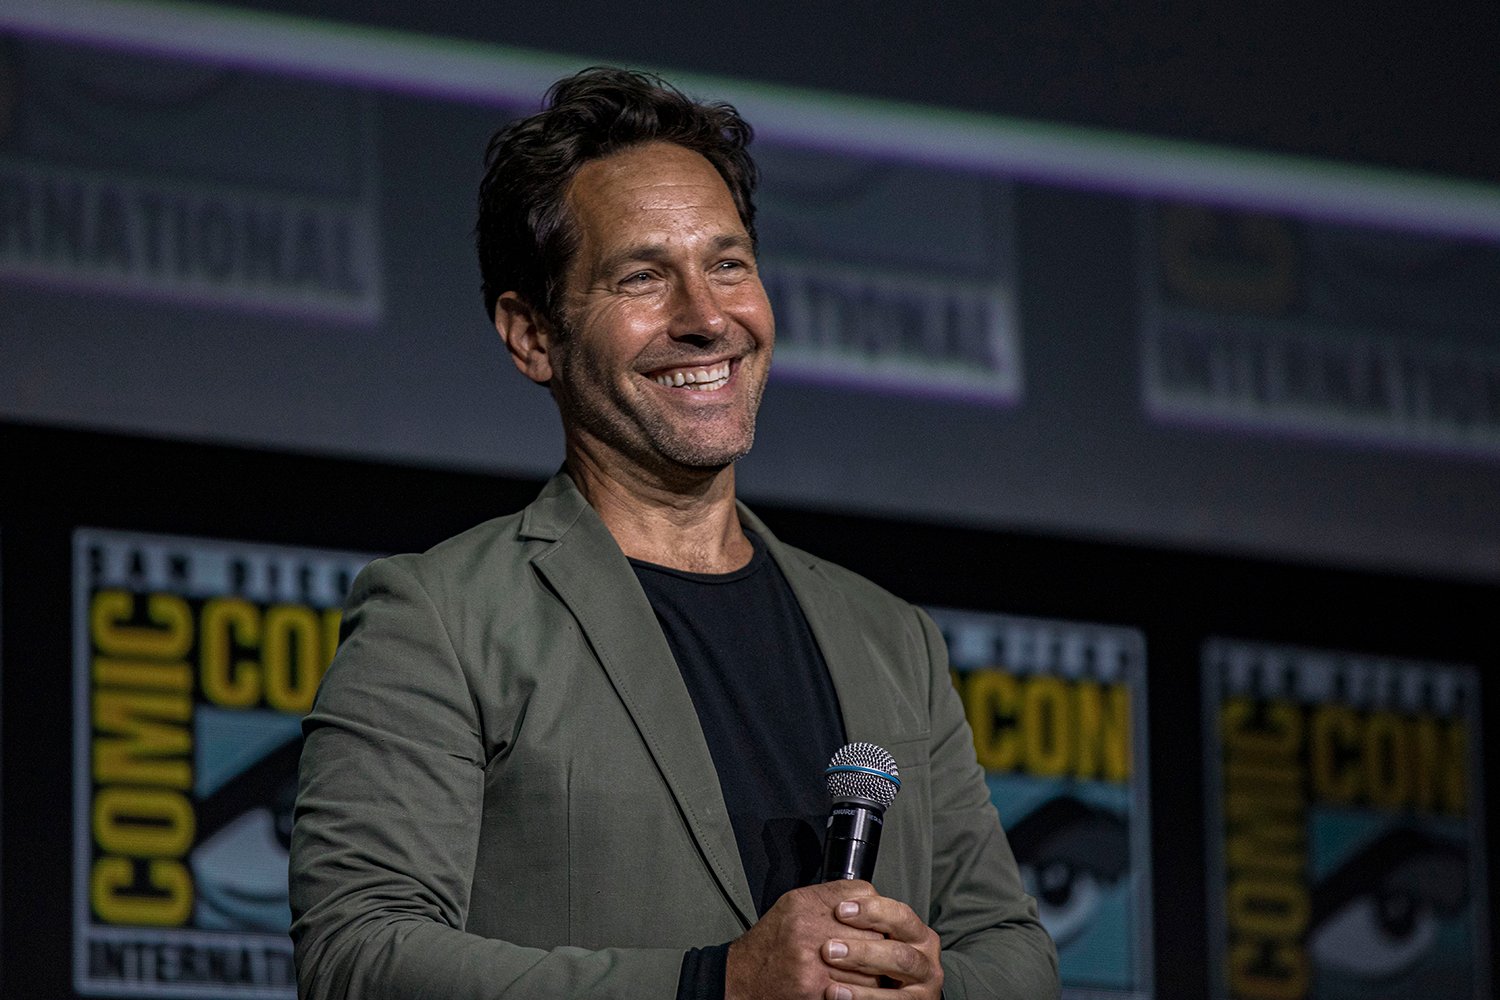 ‘Only Murders in the Building’: Inside Paul Rudd’s Cameo and Season 3 Role